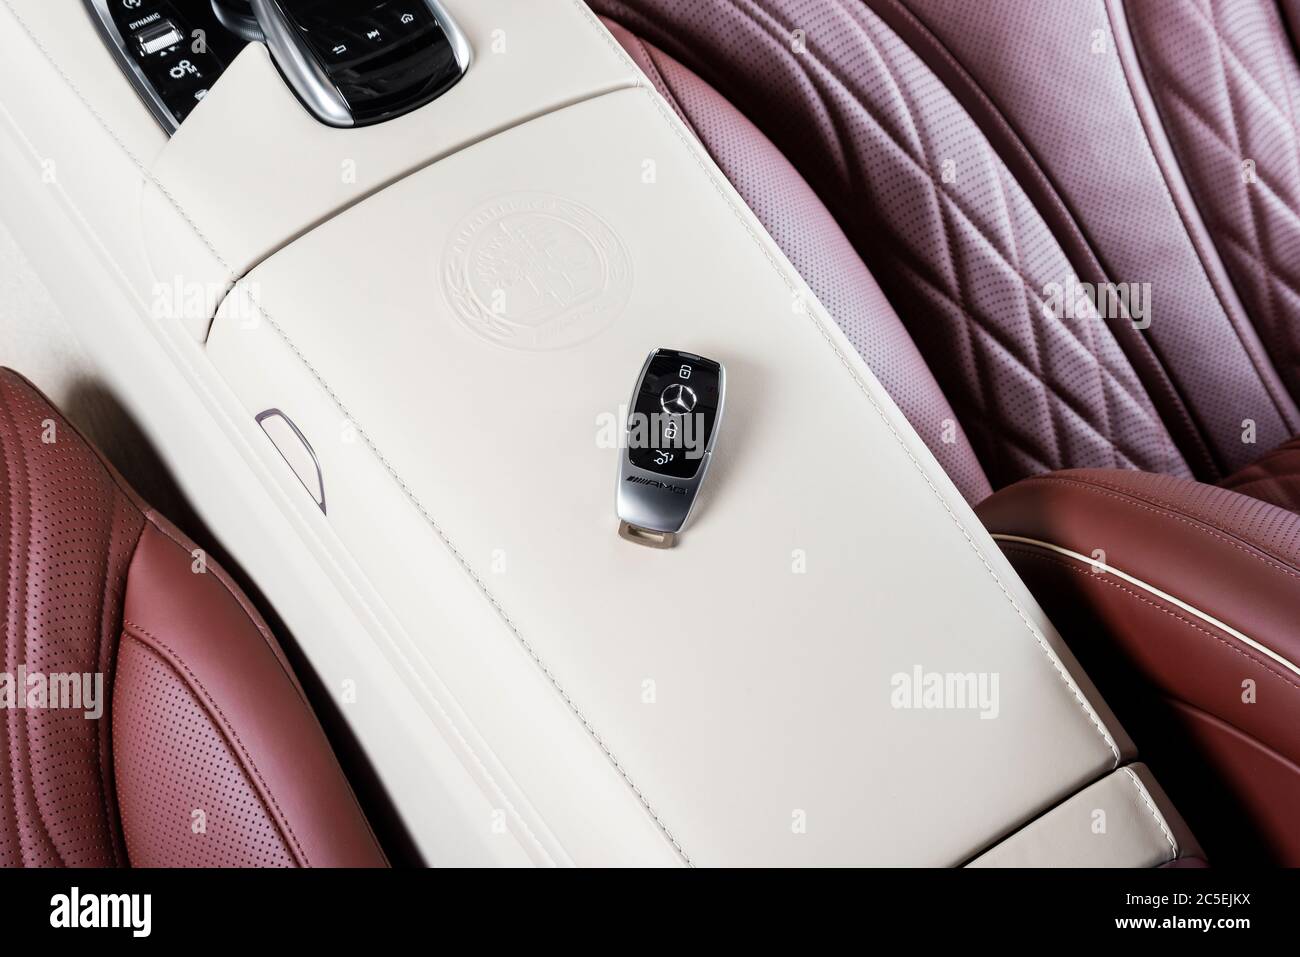 Sankt-Petersburg, Russia, January 12, 2018: Close up of key of Mercedes Benz AmG in red perforated leather interior, on the car seat Stock Photo